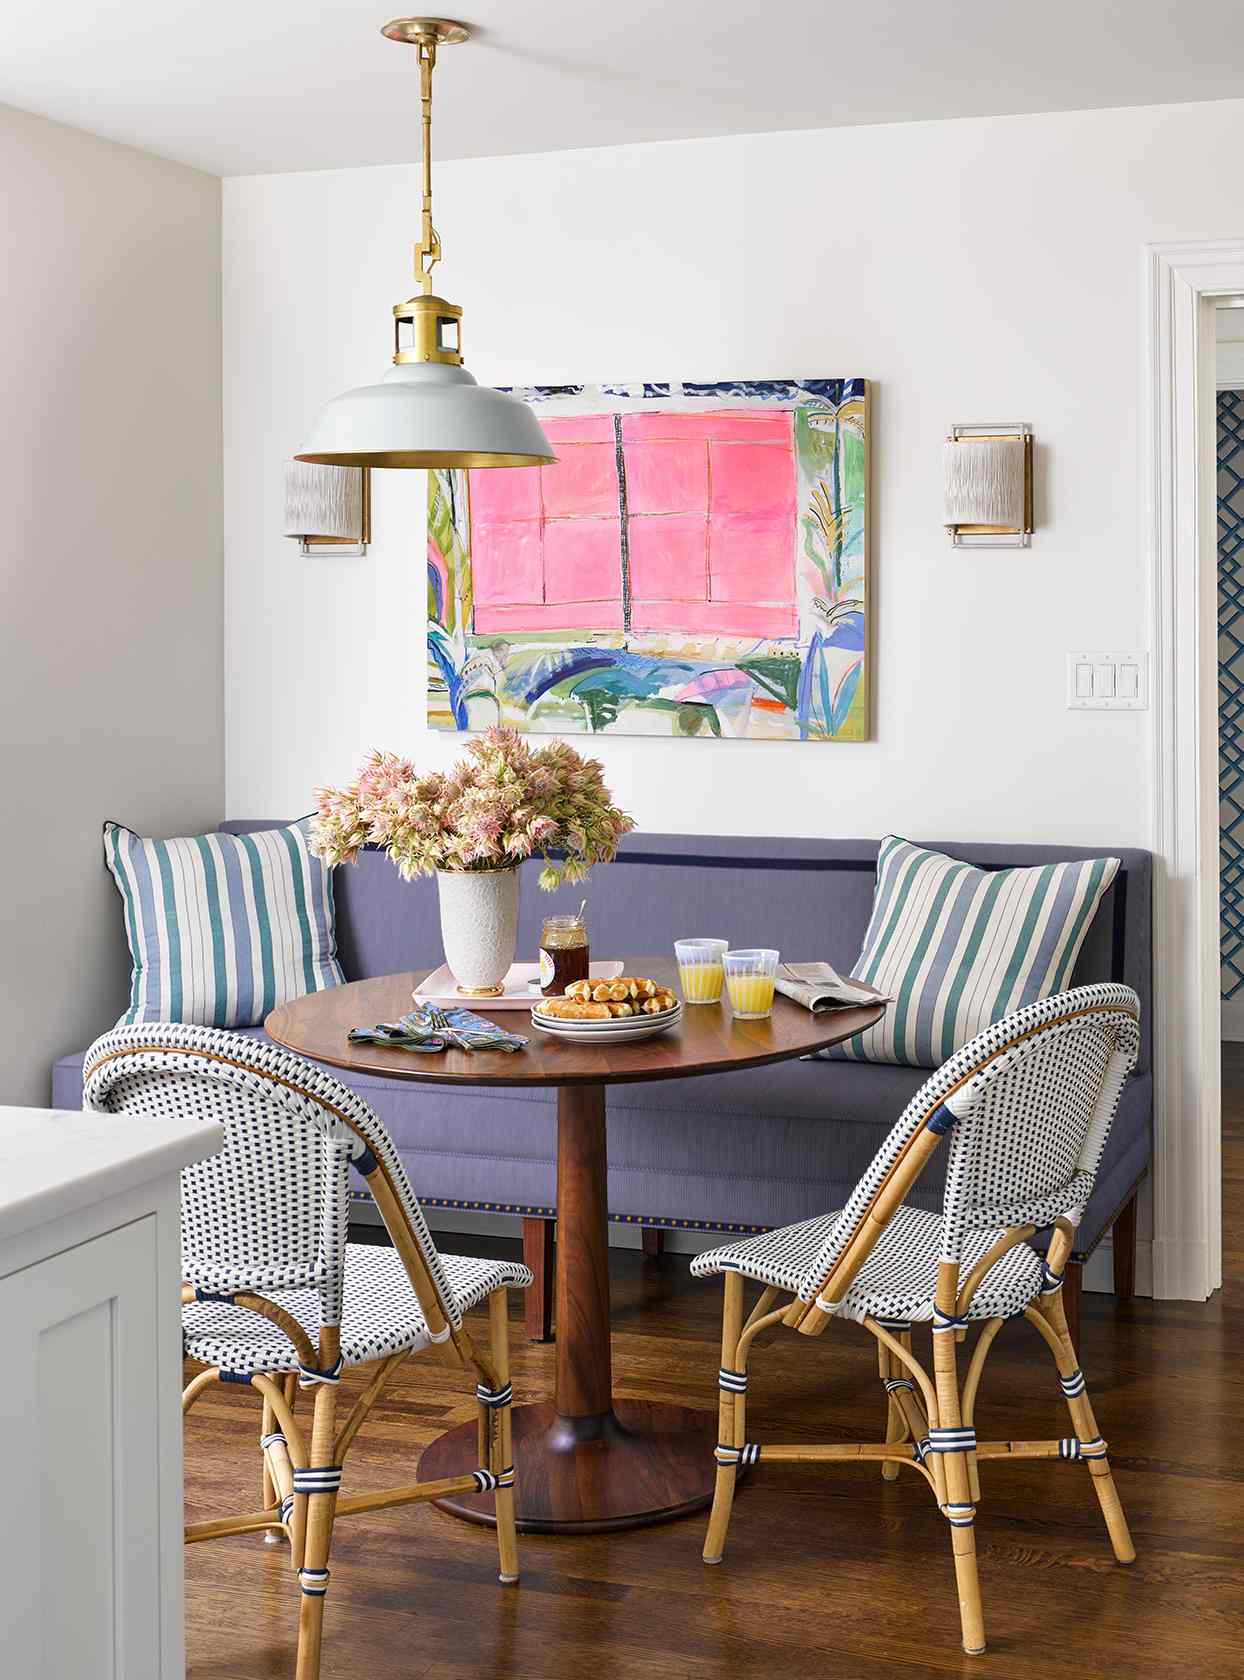 Dining area with blue couch and large artwork